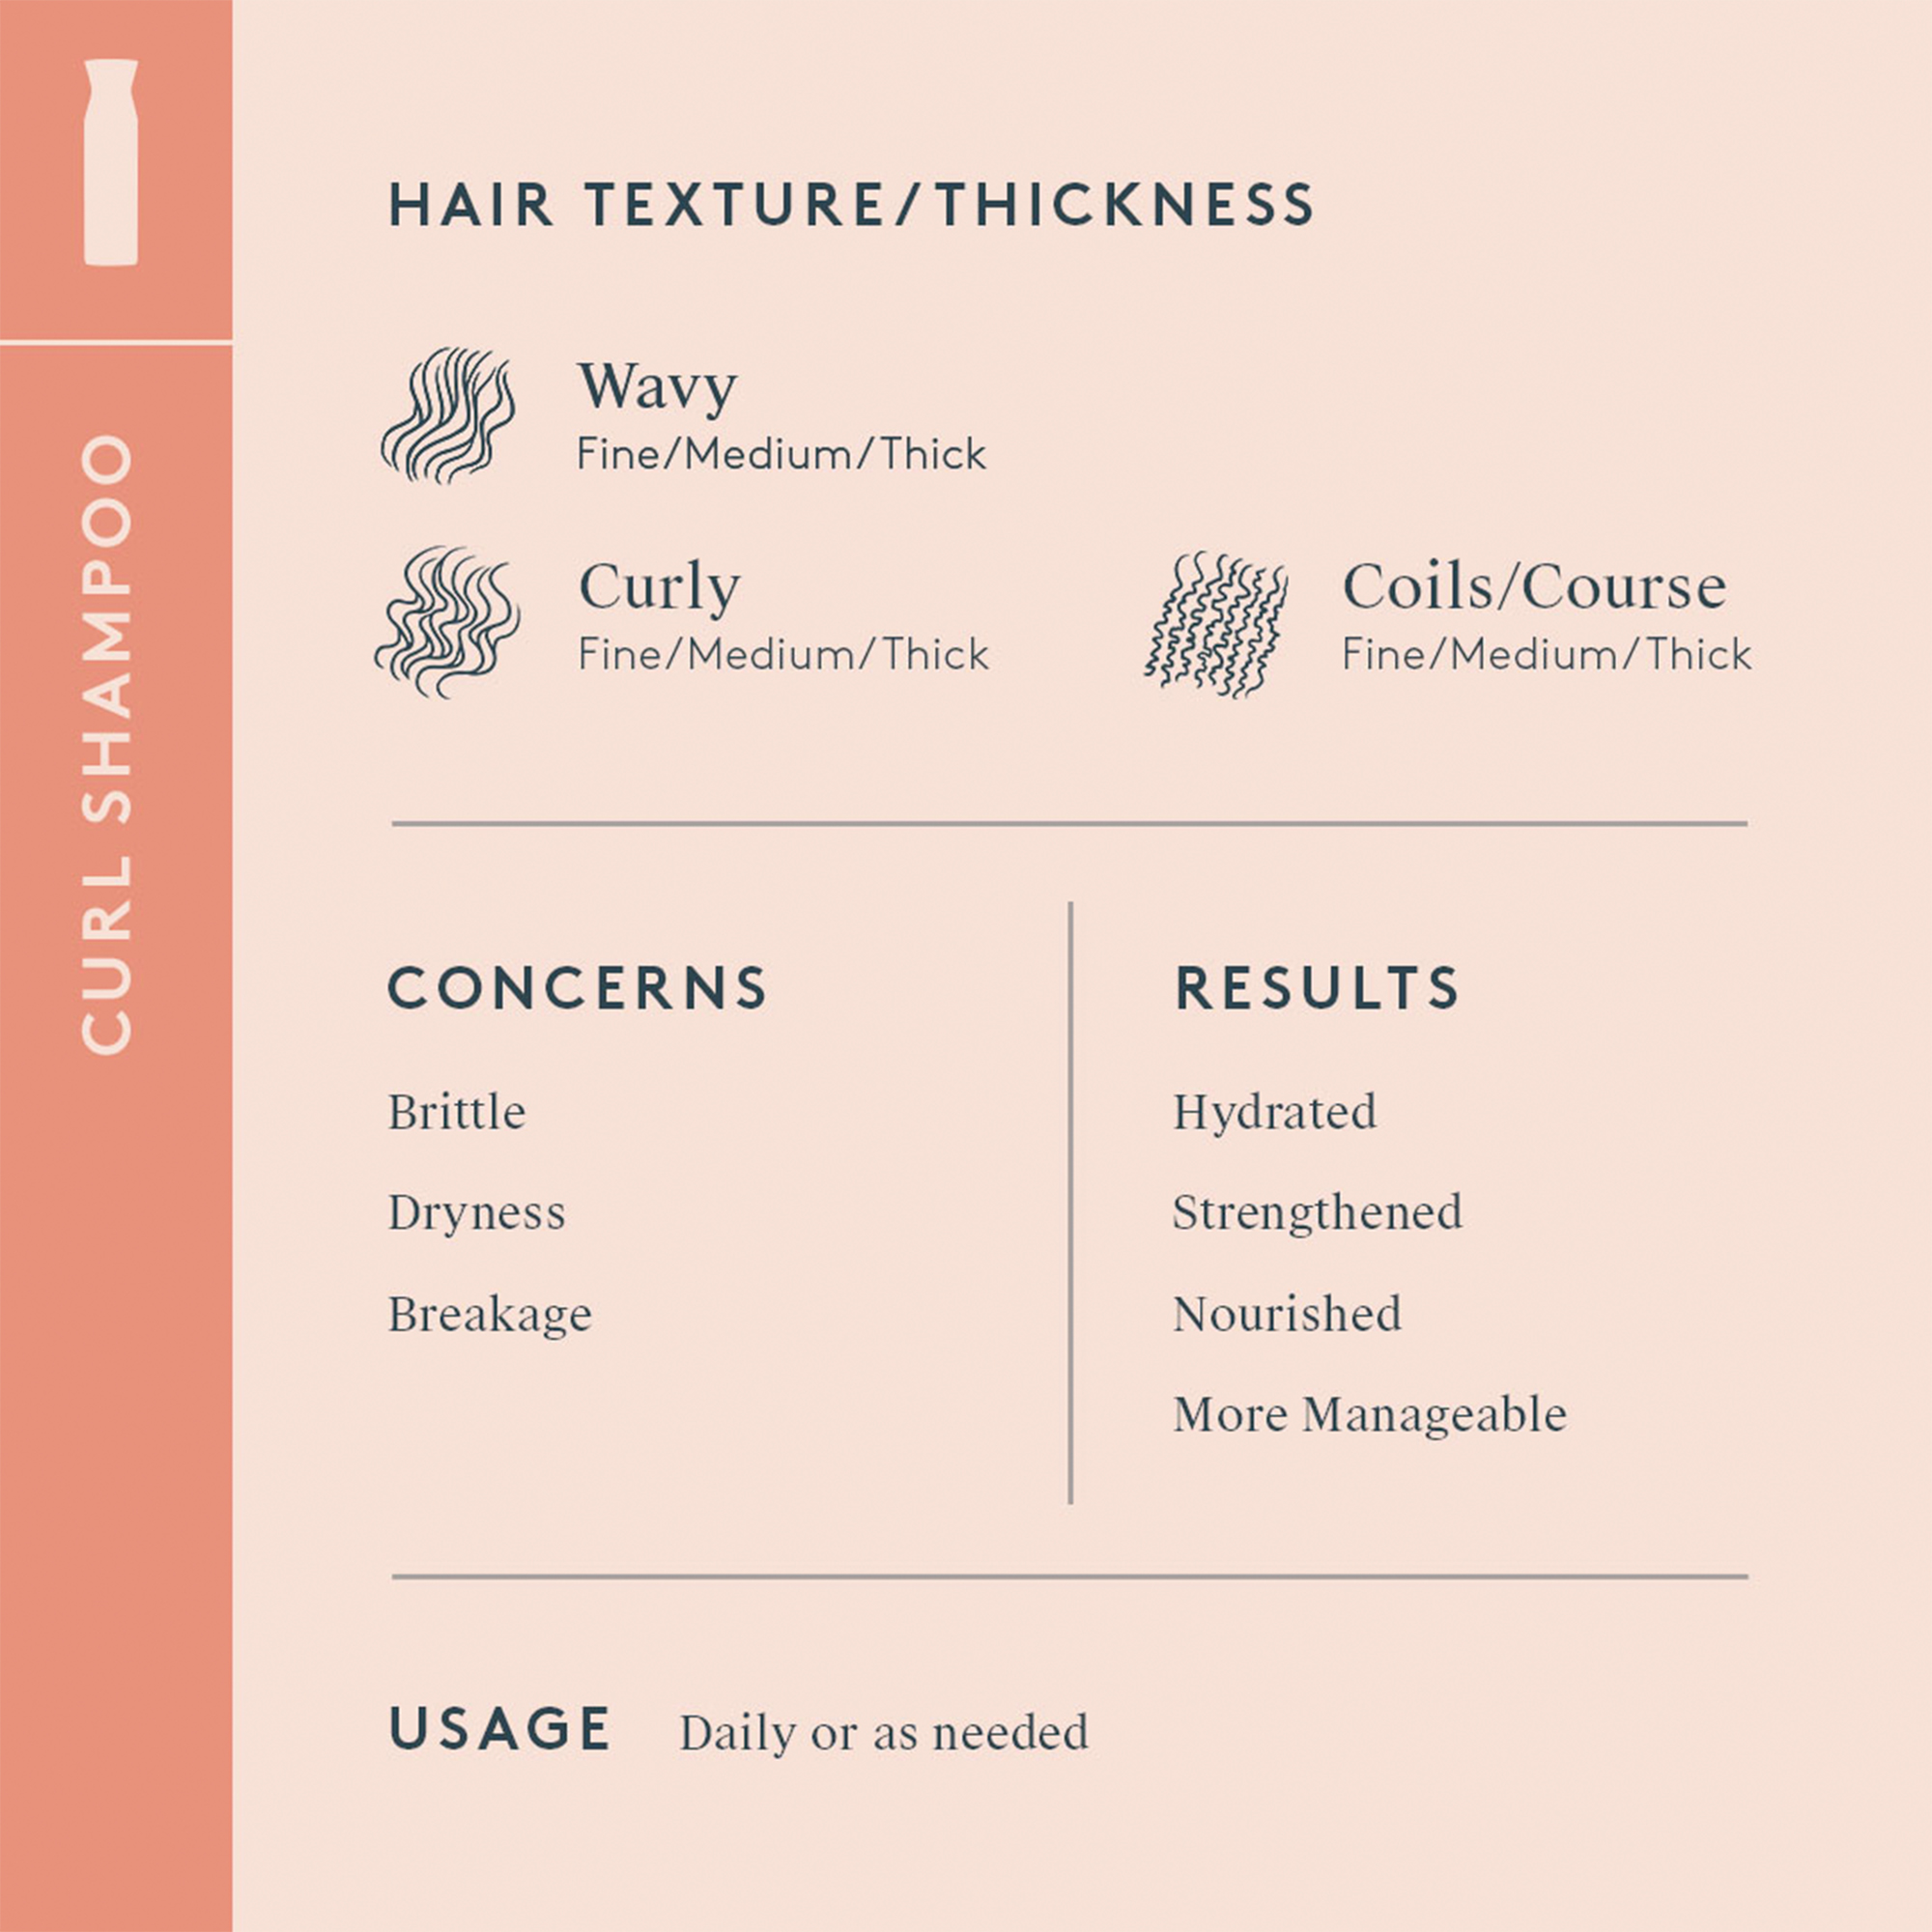 Shampoo Hair thickness and texture,Concerns, results,usage chart